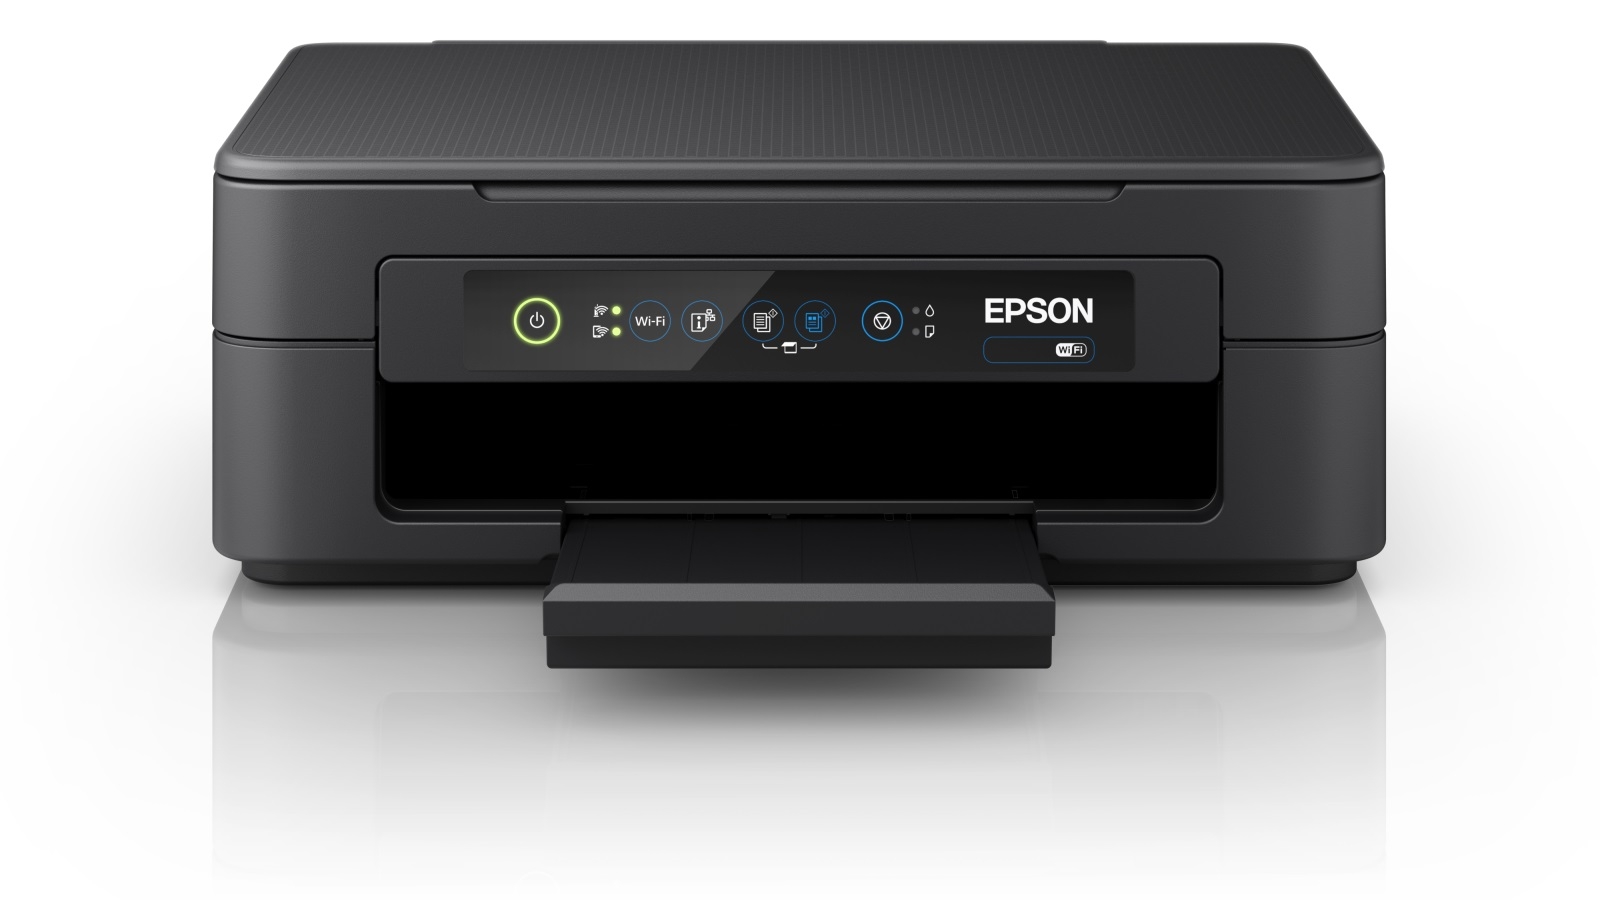 John Pye Auctions - 5 X EPSON EXPRESSION HOME XP-2200 PRINTER, 3-IN-1  MULTIFUNCTION: SCANNER/COPIER, A4, COLOR INKJET, WI-FI DIRECT, SEPARATE  CARTRIDGES, ULTRA-COMPACT.